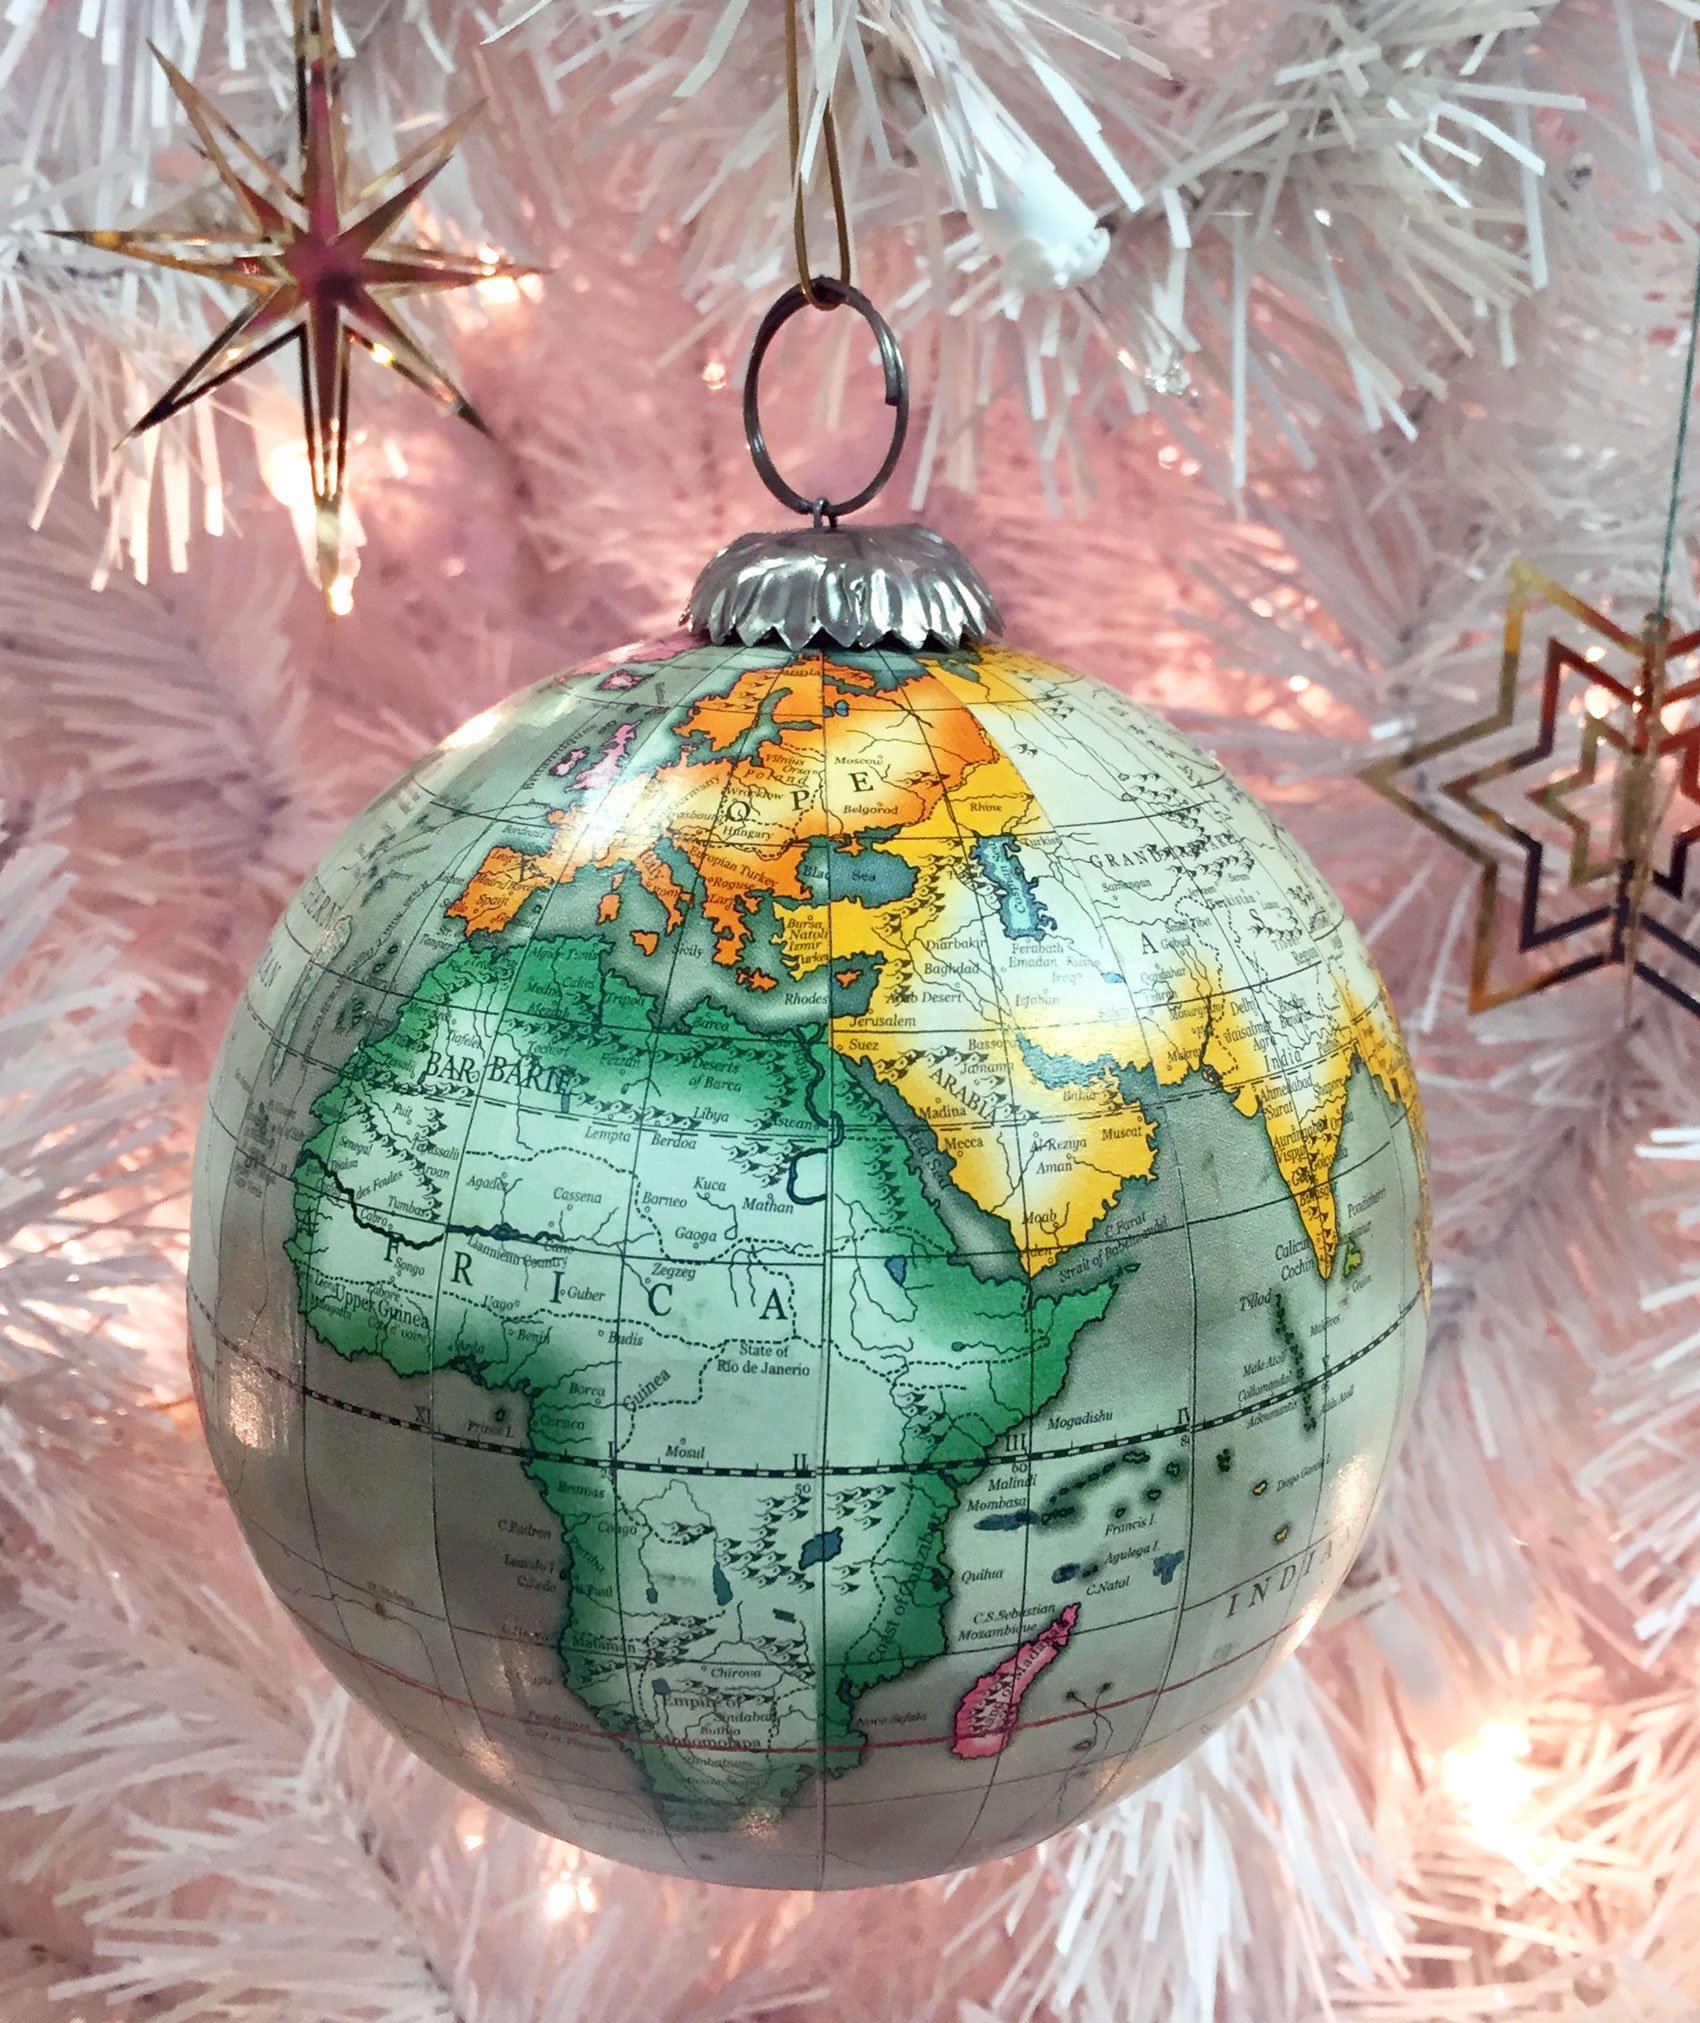 A globe ornament with a detailed world map, and two German gold star ornaments | OrnamentShop.com